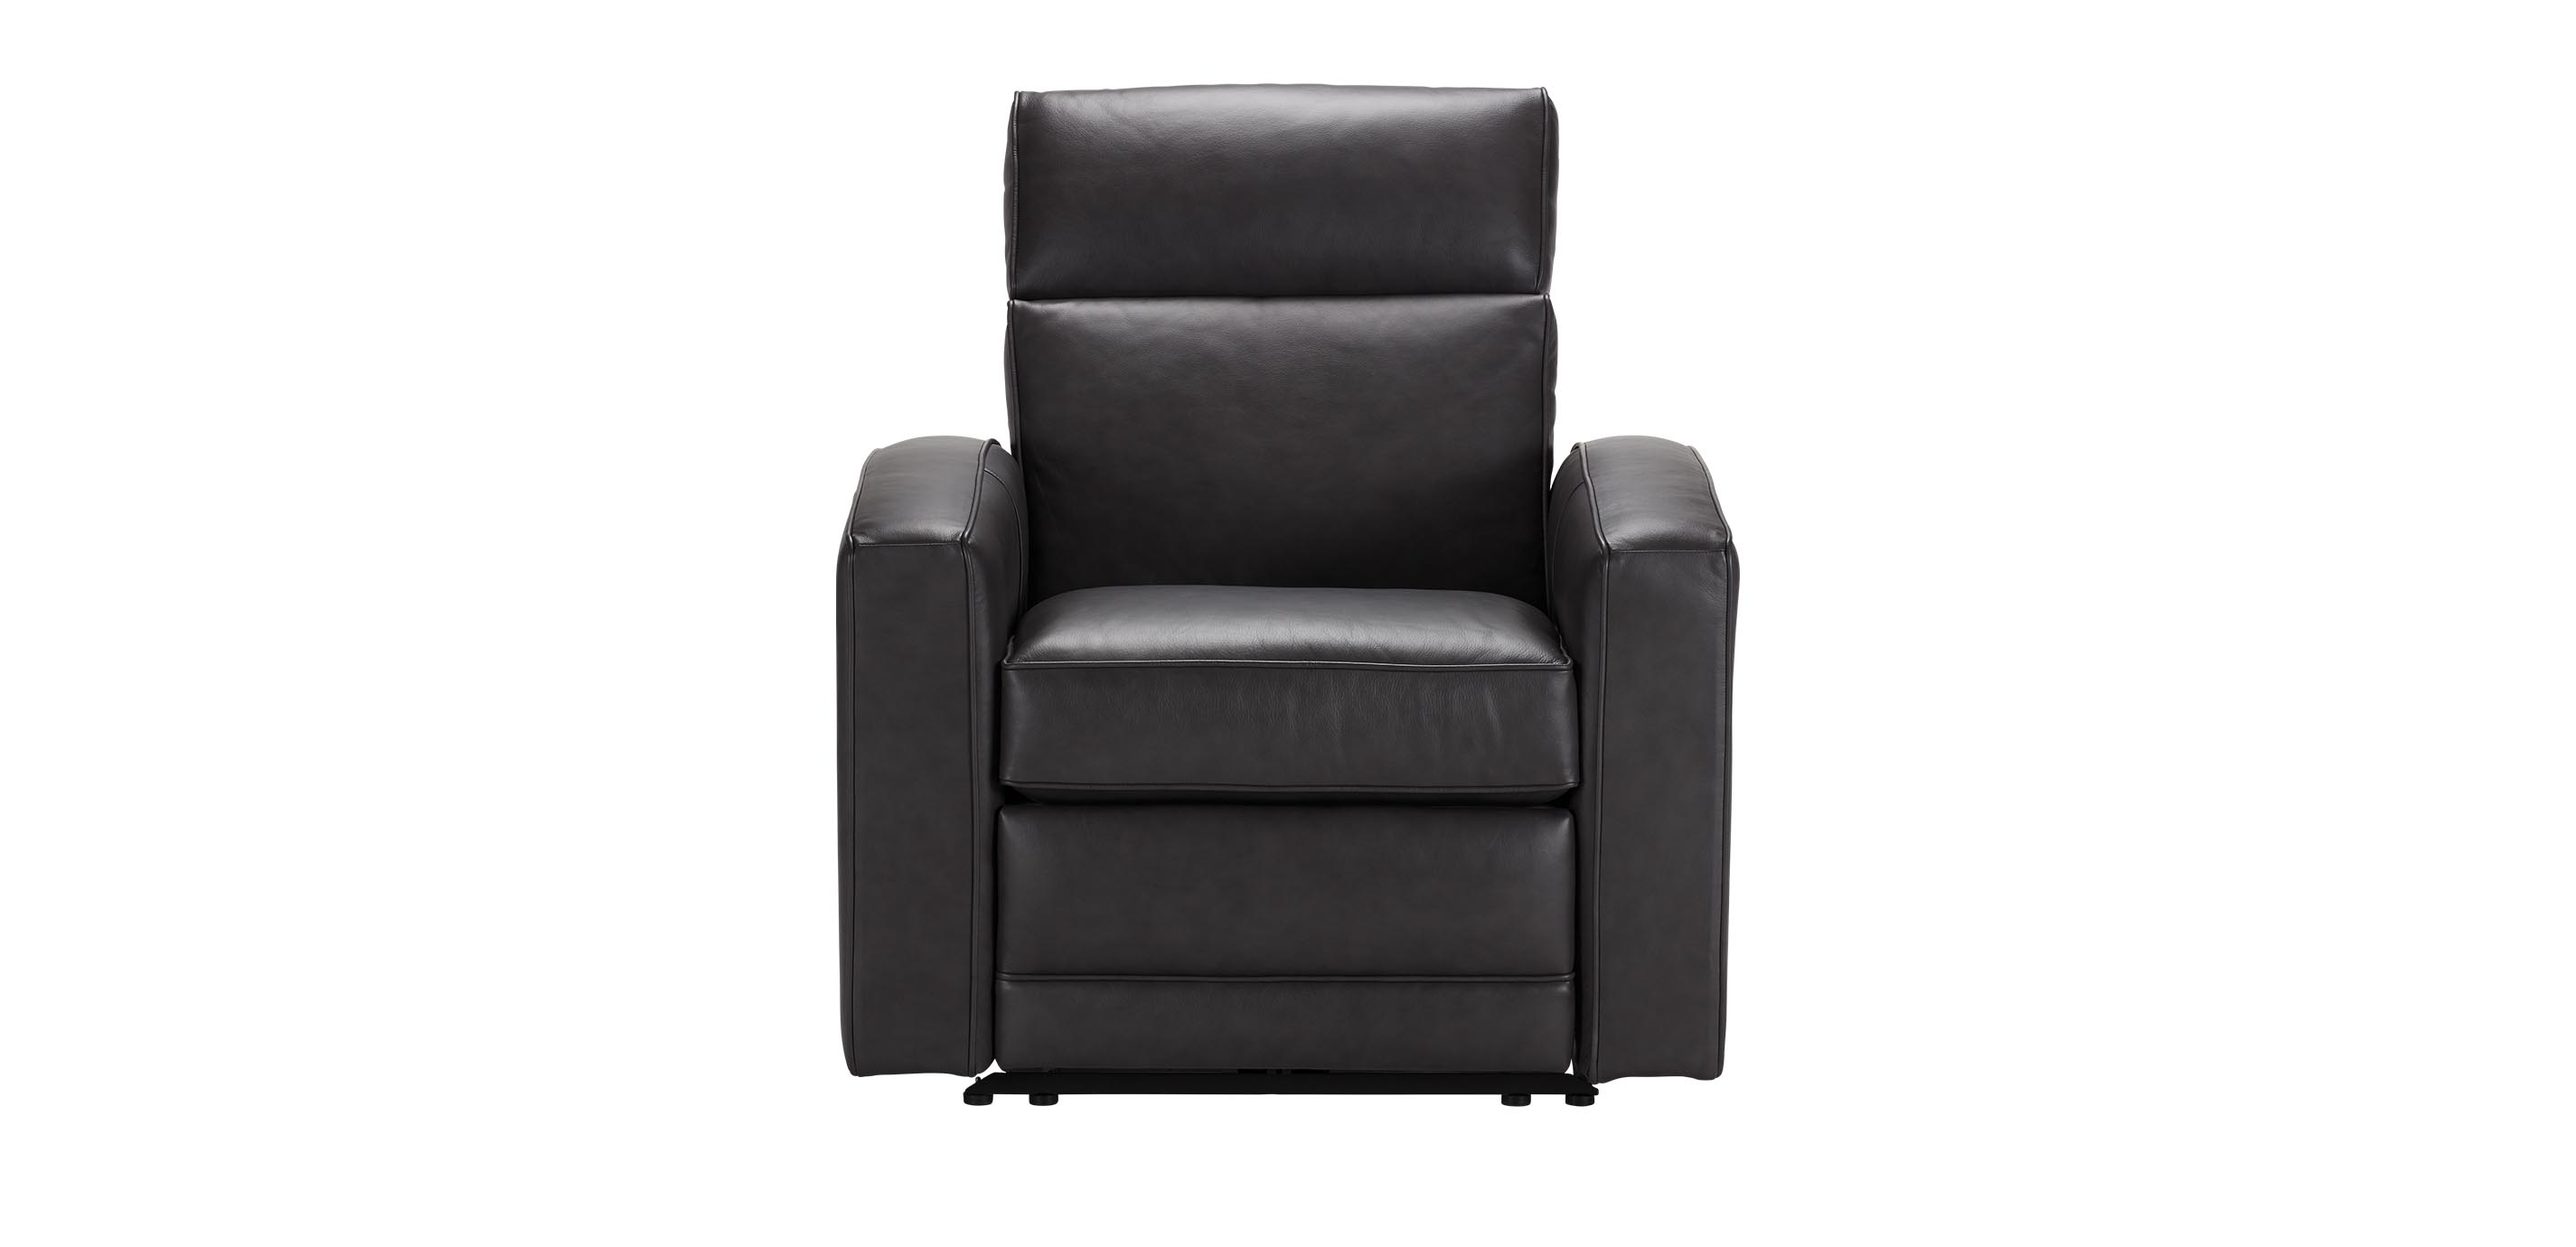 Graham Leather Recliner from Ethan Allen